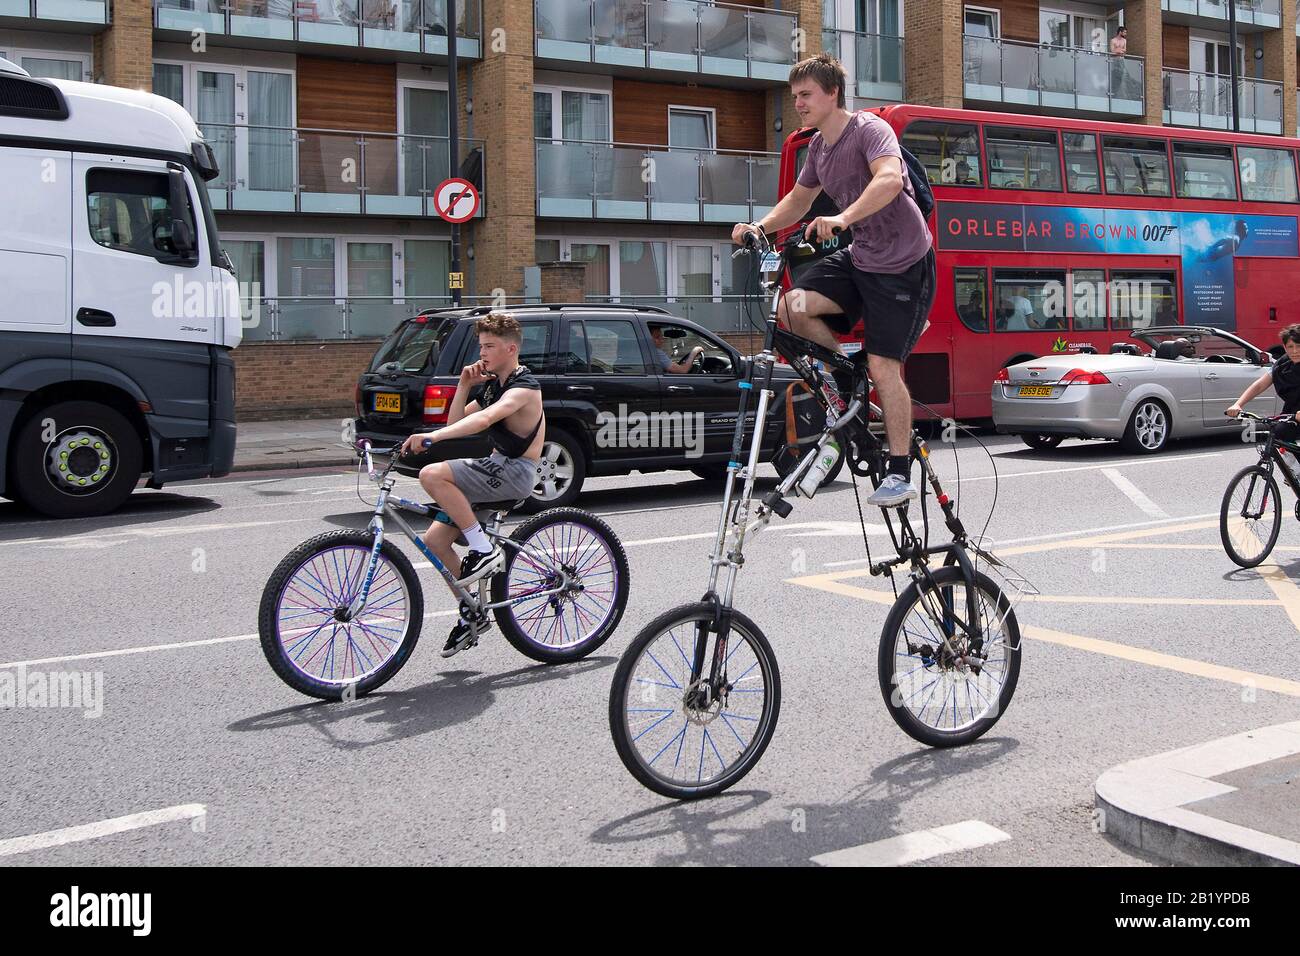 Bikestormz along Nine Elms Lane. A ride-out with nearly 3,000 cyclists in their teens and early twenties. London. 1 June 2019. Stock Photo